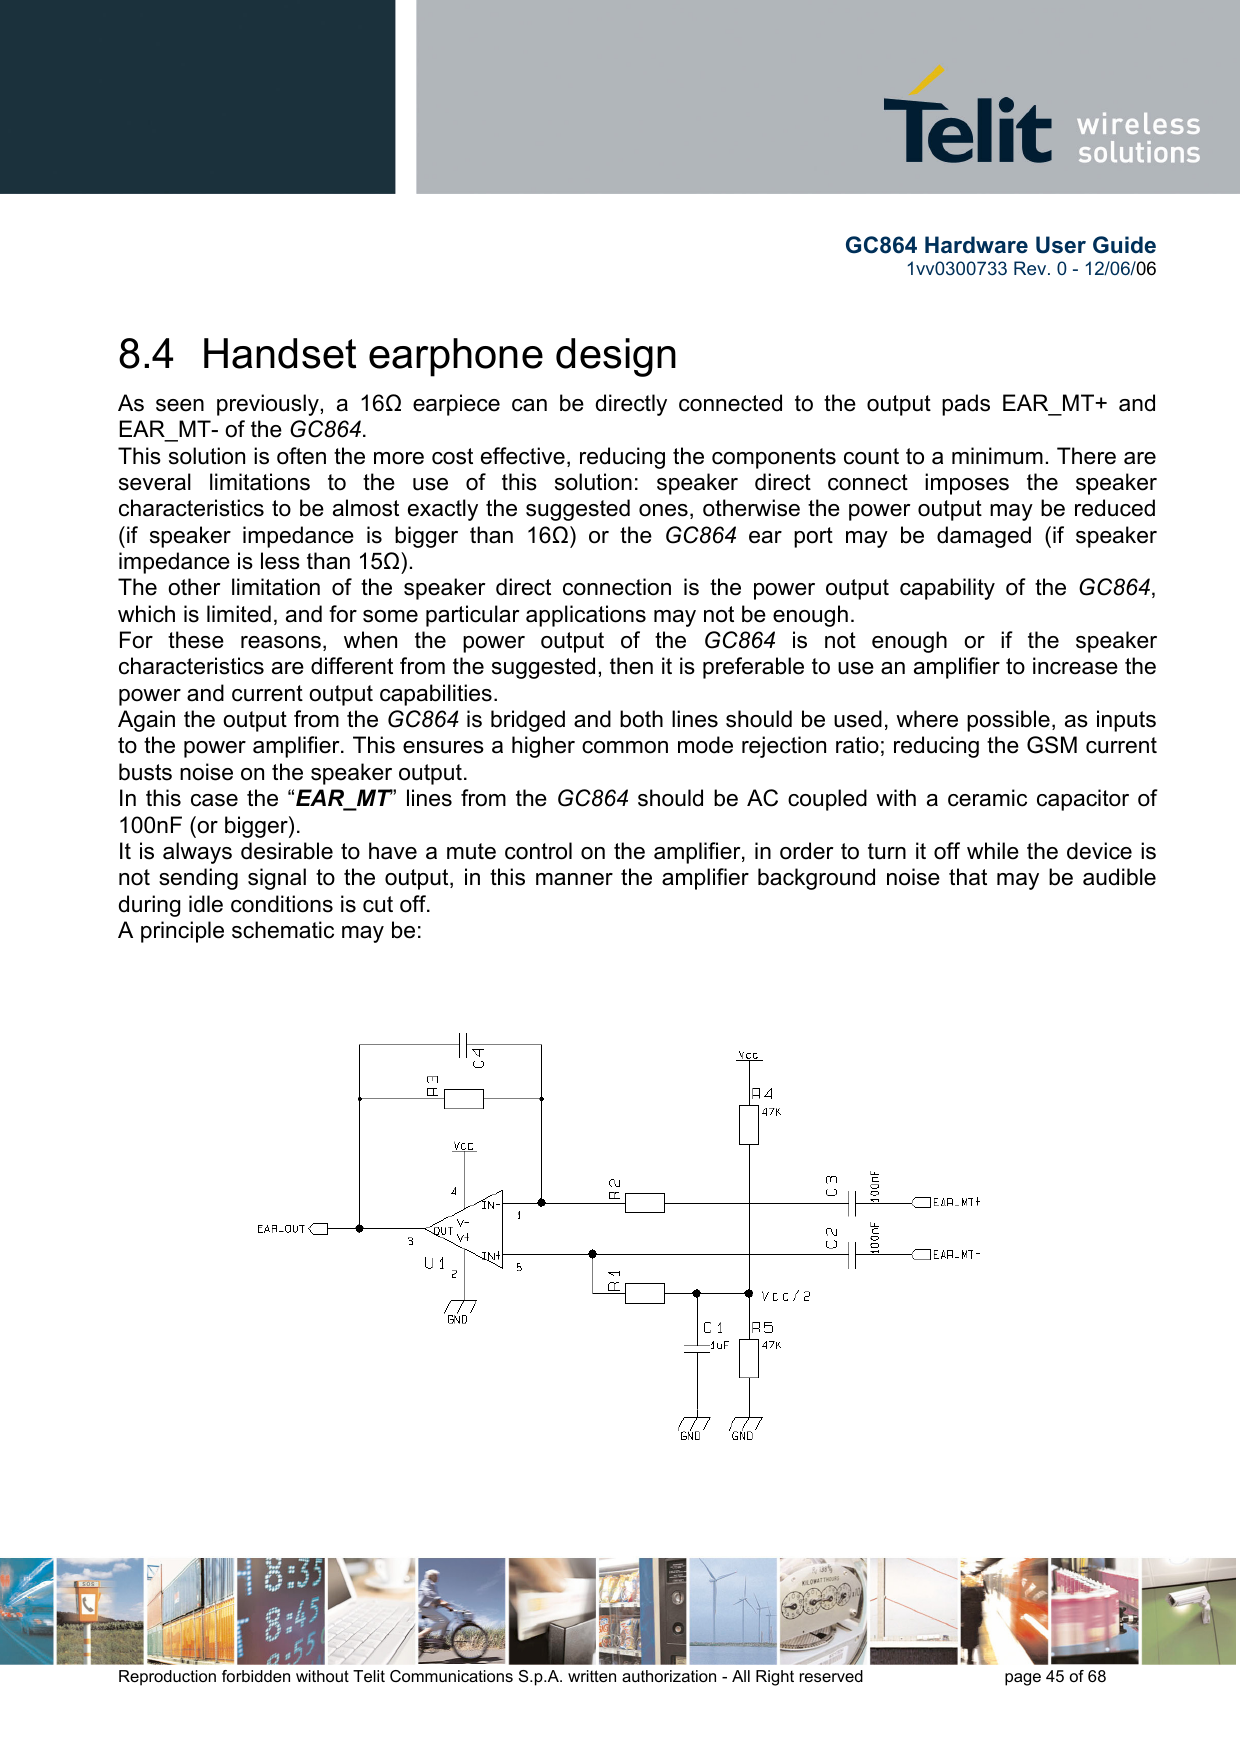        GC864 Hardware User Guide  1vv0300733 Rev. 0 - 12/06/06  Reproduction forbidden without Telit Communications S.p.A. written authorization - All Right reserved    page 45 of 68  8.4  Handset earphone design As seen previously, a 16Ω earpiece can be directly connected to the output pads EAR_MT+ and EAR_MT- of the GC864. This solution is often the more cost effective, reducing the components count to a minimum. There are several limitations to the use of this solution: speaker direct connect imposes the speaker characteristics to be almost exactly the suggested ones, otherwise the power output may be reduced (if speaker impedance is bigger than 16Ω) or the GC864 ear port may be damaged (if speaker impedance is less than 15Ω). The other limitation of the speaker direct connection is the power output capability of the GC864, which is limited, and for some particular applications may not be enough. For these reasons, when the power output of the GC864 is not enough or if the speaker characteristics are different from the suggested, then it is preferable to use an amplifier to increase the power and current output capabilities.  Again the output from the GC864 is bridged and both lines should be used, where possible, as inputs to the power amplifier. This ensures a higher common mode rejection ratio; reducing the GSM current busts noise on the speaker output. In this case the “EAR_MT” lines from the GC864 should be AC coupled with a ceramic capacitor of 100nF (or bigger). It is always desirable to have a mute control on the amplifier, in order to turn it off while the device is not sending signal to the output, in this manner the amplifier background noise that may be audible during idle conditions is cut off. A principle schematic may be:  